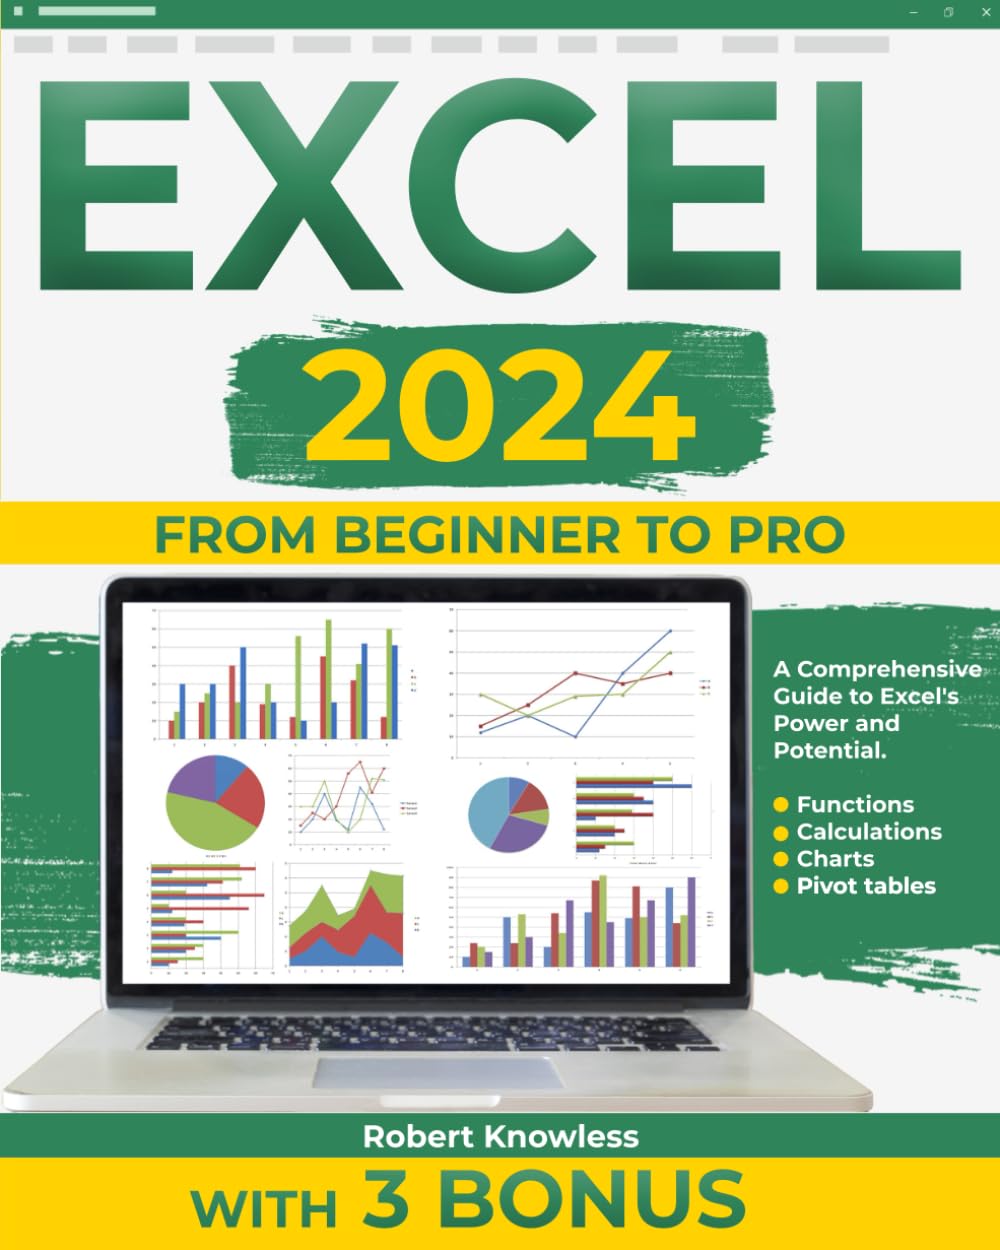 Excel 2024: From Beginner to Pro- A Comprehensive Guide to Excel`s Power and Potential. Functions, Calculations, Charts, Pivot tables. With 3 Bonus